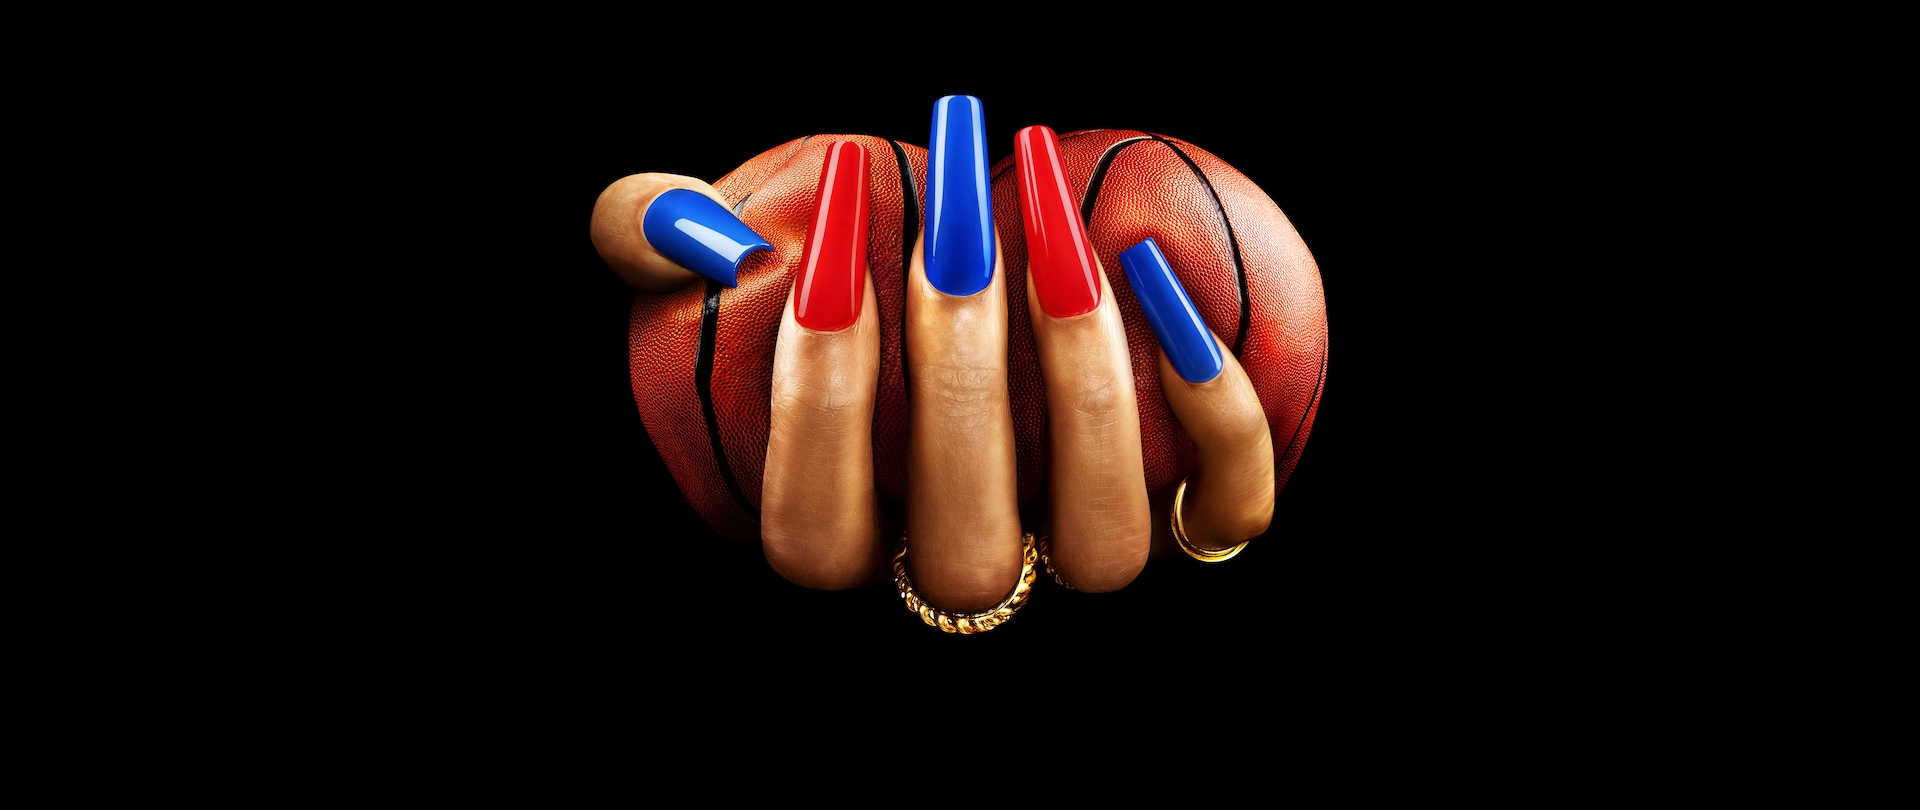 Hand with blue and red nails holding 2 basketballs. 